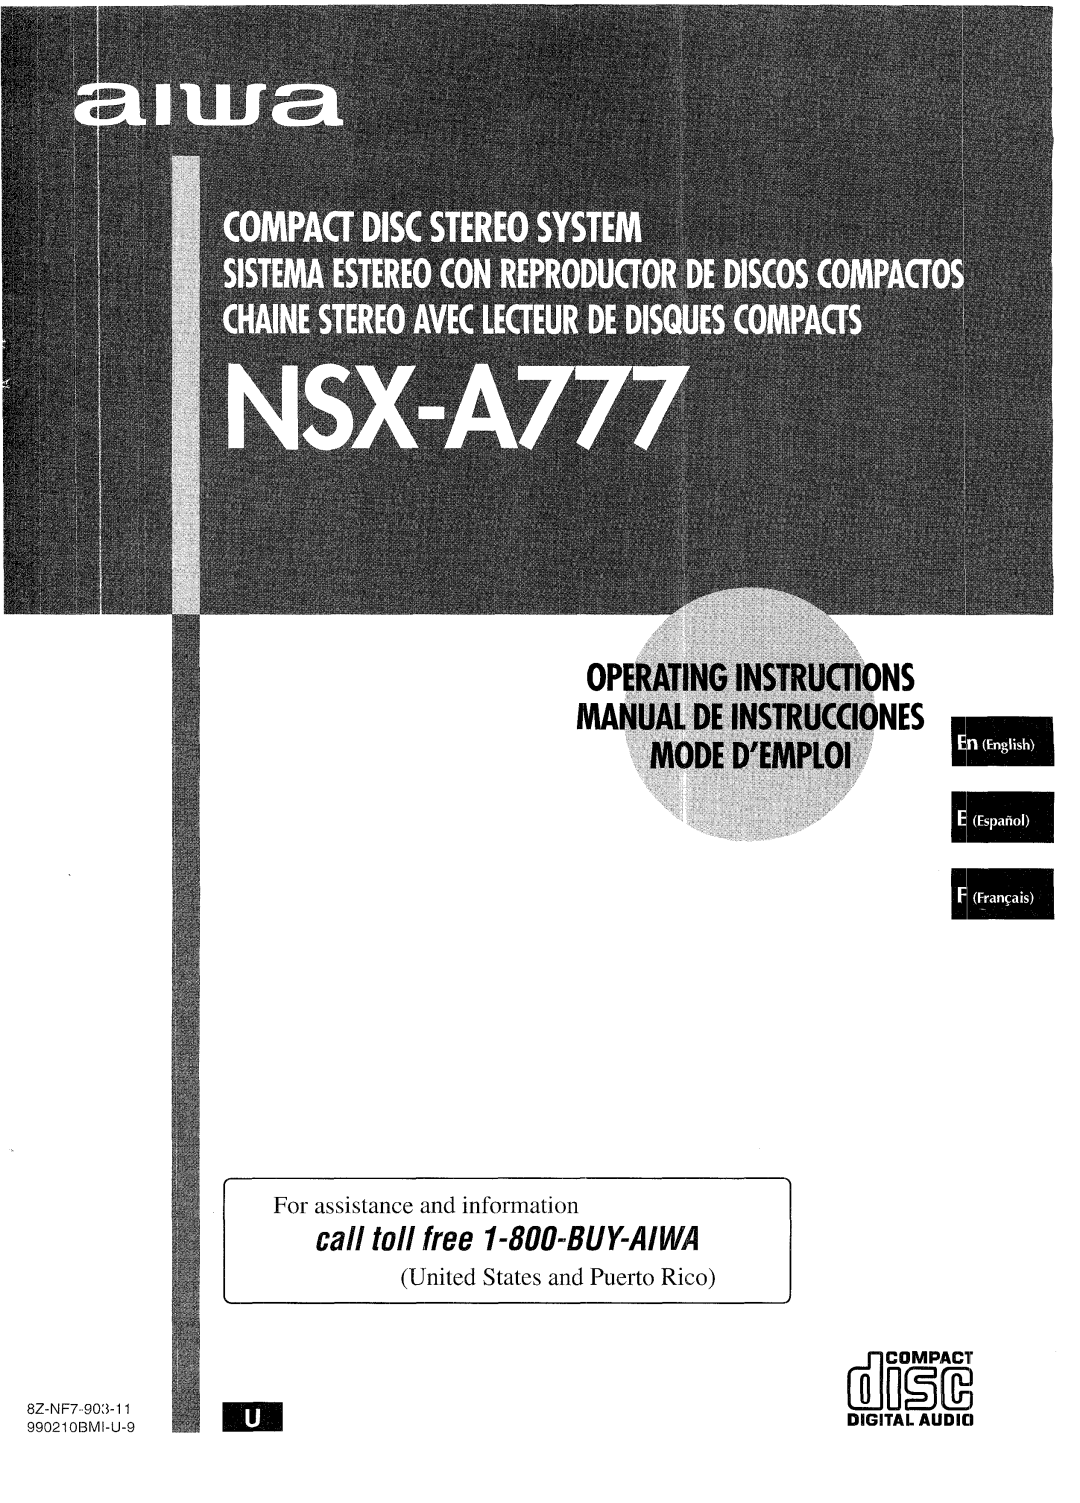 Sony NSX-A777 manual For assistance and information, United States and Puerto Rico, Digital Audici, dlriiii 